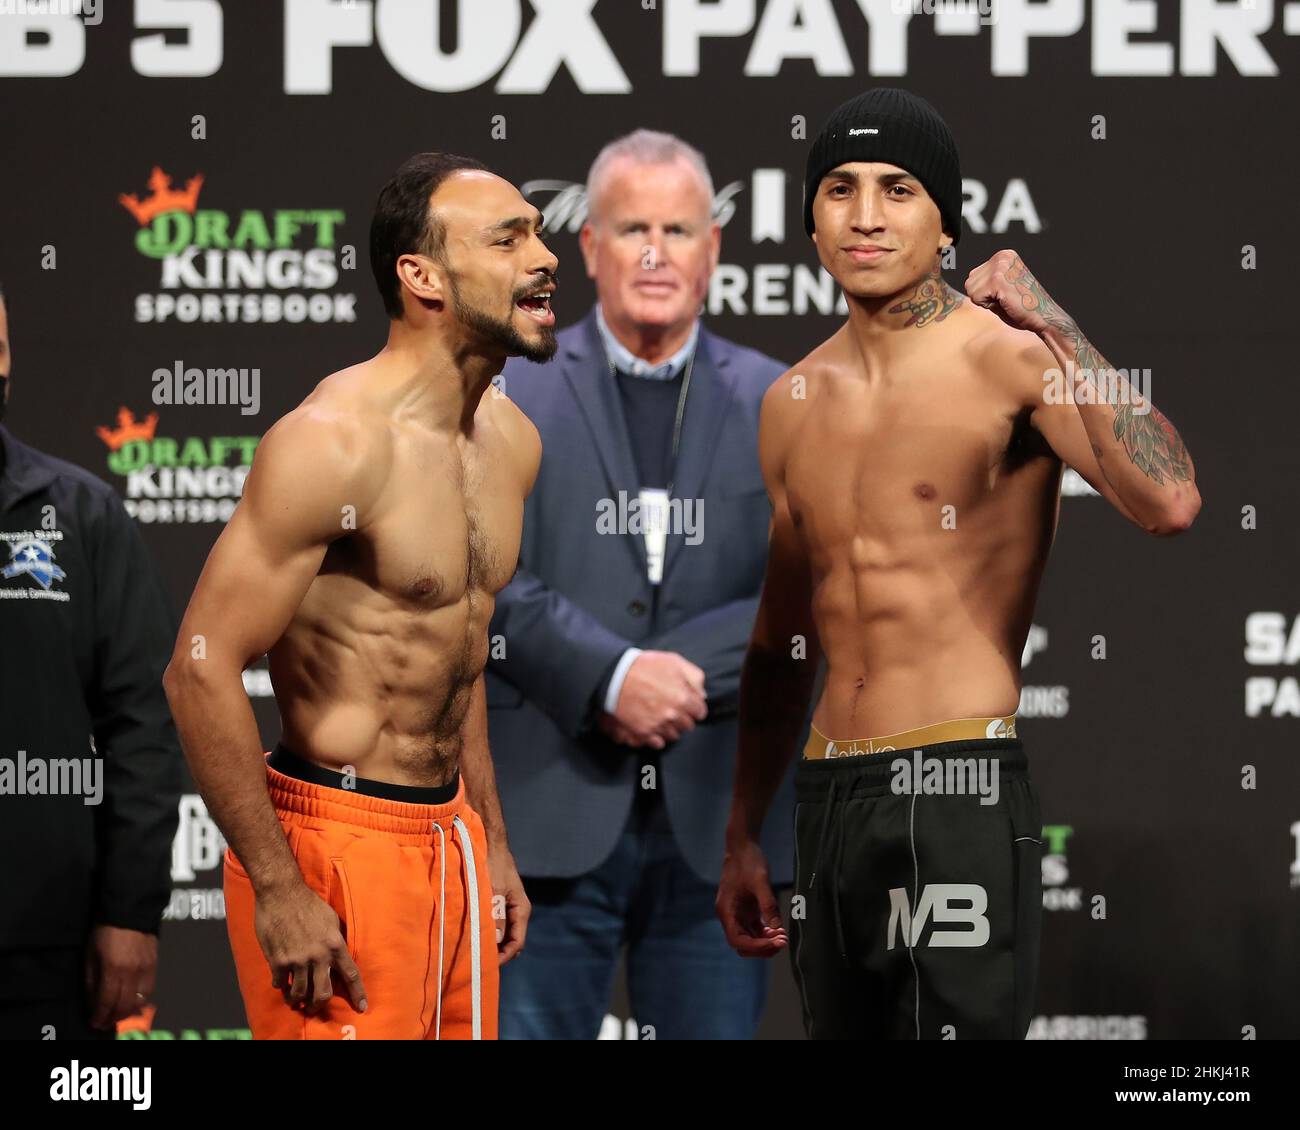 Las Vegas, USA. 04th Feb, 2022. LAS VEGAS, NV - FEBRUARY 4: (L-R) Boxers Keith Thurman and Mario Barrios face off during the official weigh-in for their bout at the Mandalay Bay Michelob Ultra Arena February 5, 2022 in Las Vegas, Nevada. (Photo by Alejandro Salazar/PxImages) Credit: Px Images/Alamy Live News Stock Photo